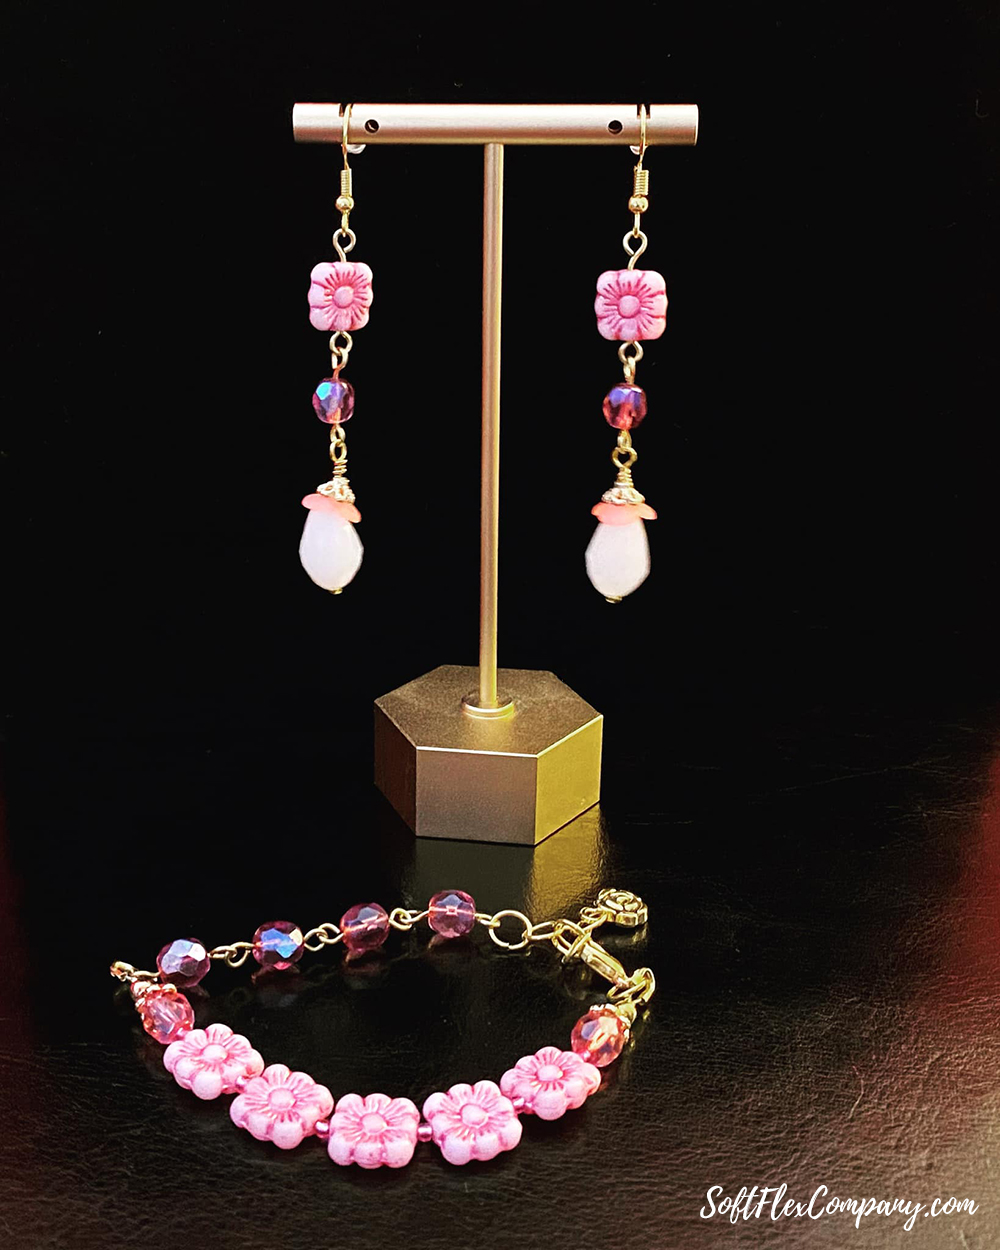 Cherry Blossoms Jewelry by Maria D. Velazquez